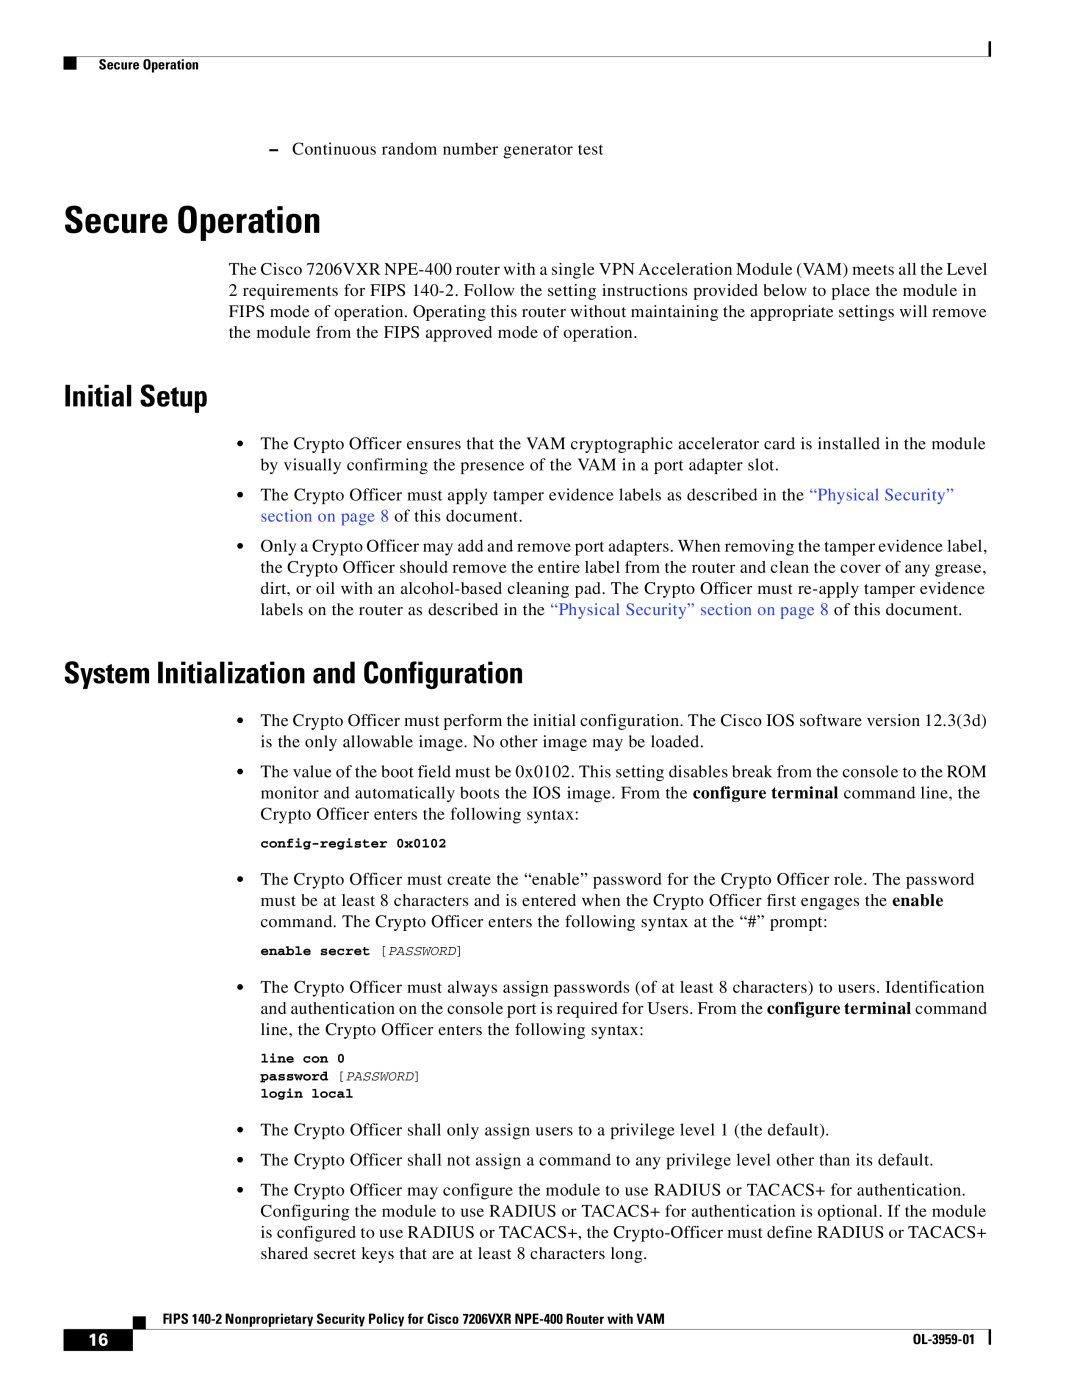 Cisco Systems 7206VXR NPE-400 manual Secure Operation, Initial Setup, System Initialization and Configuration 